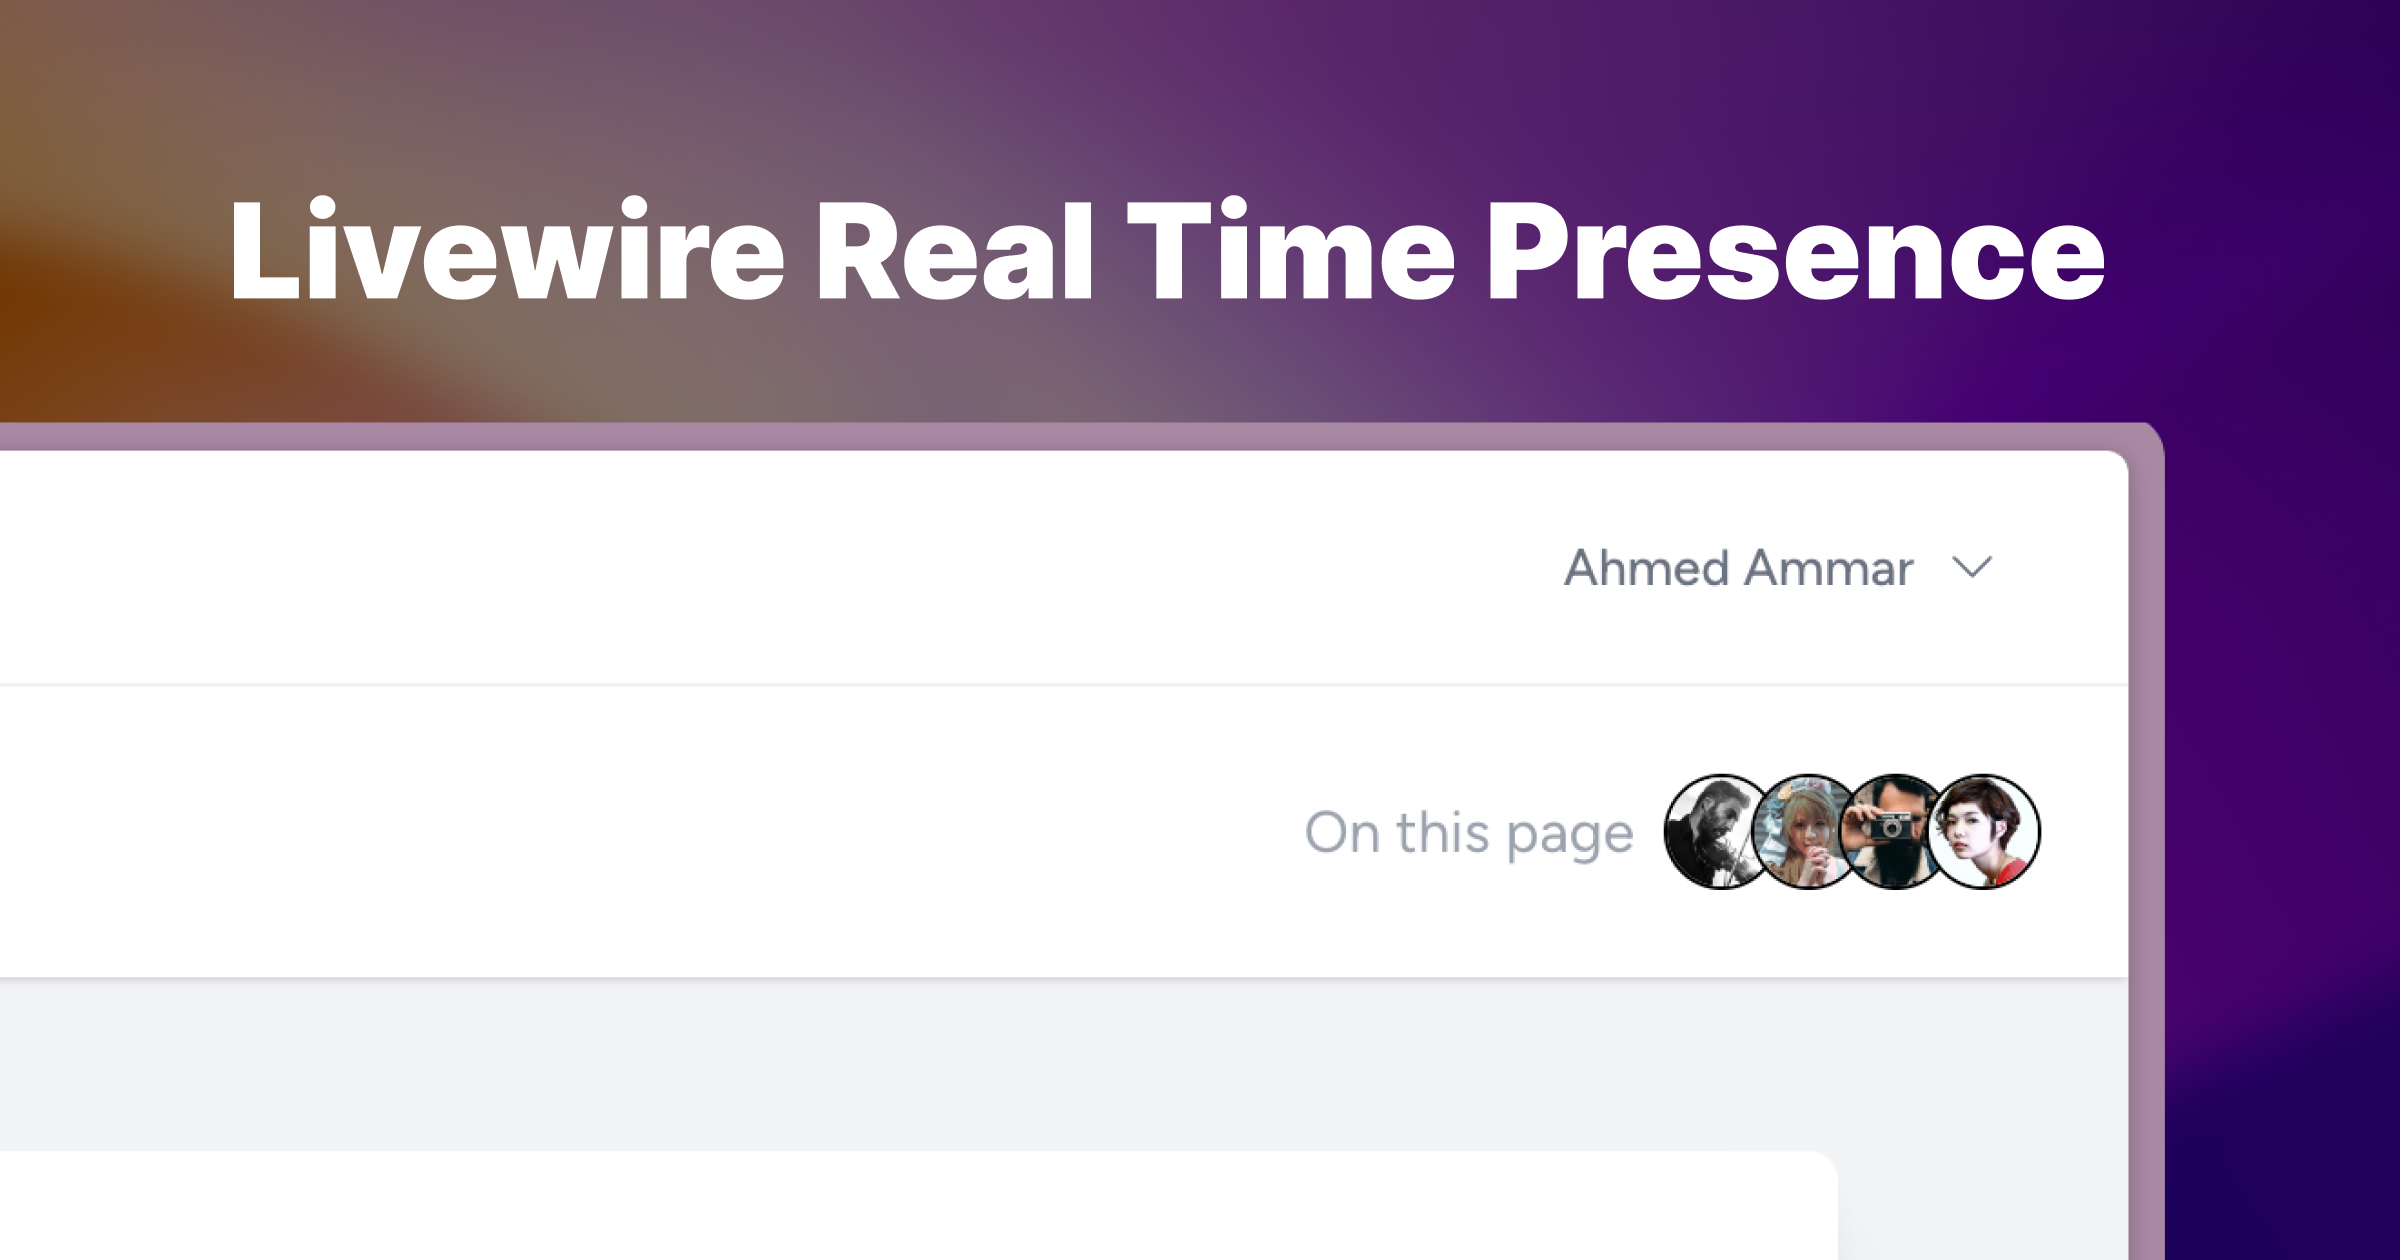 Livewire Real Time Presence